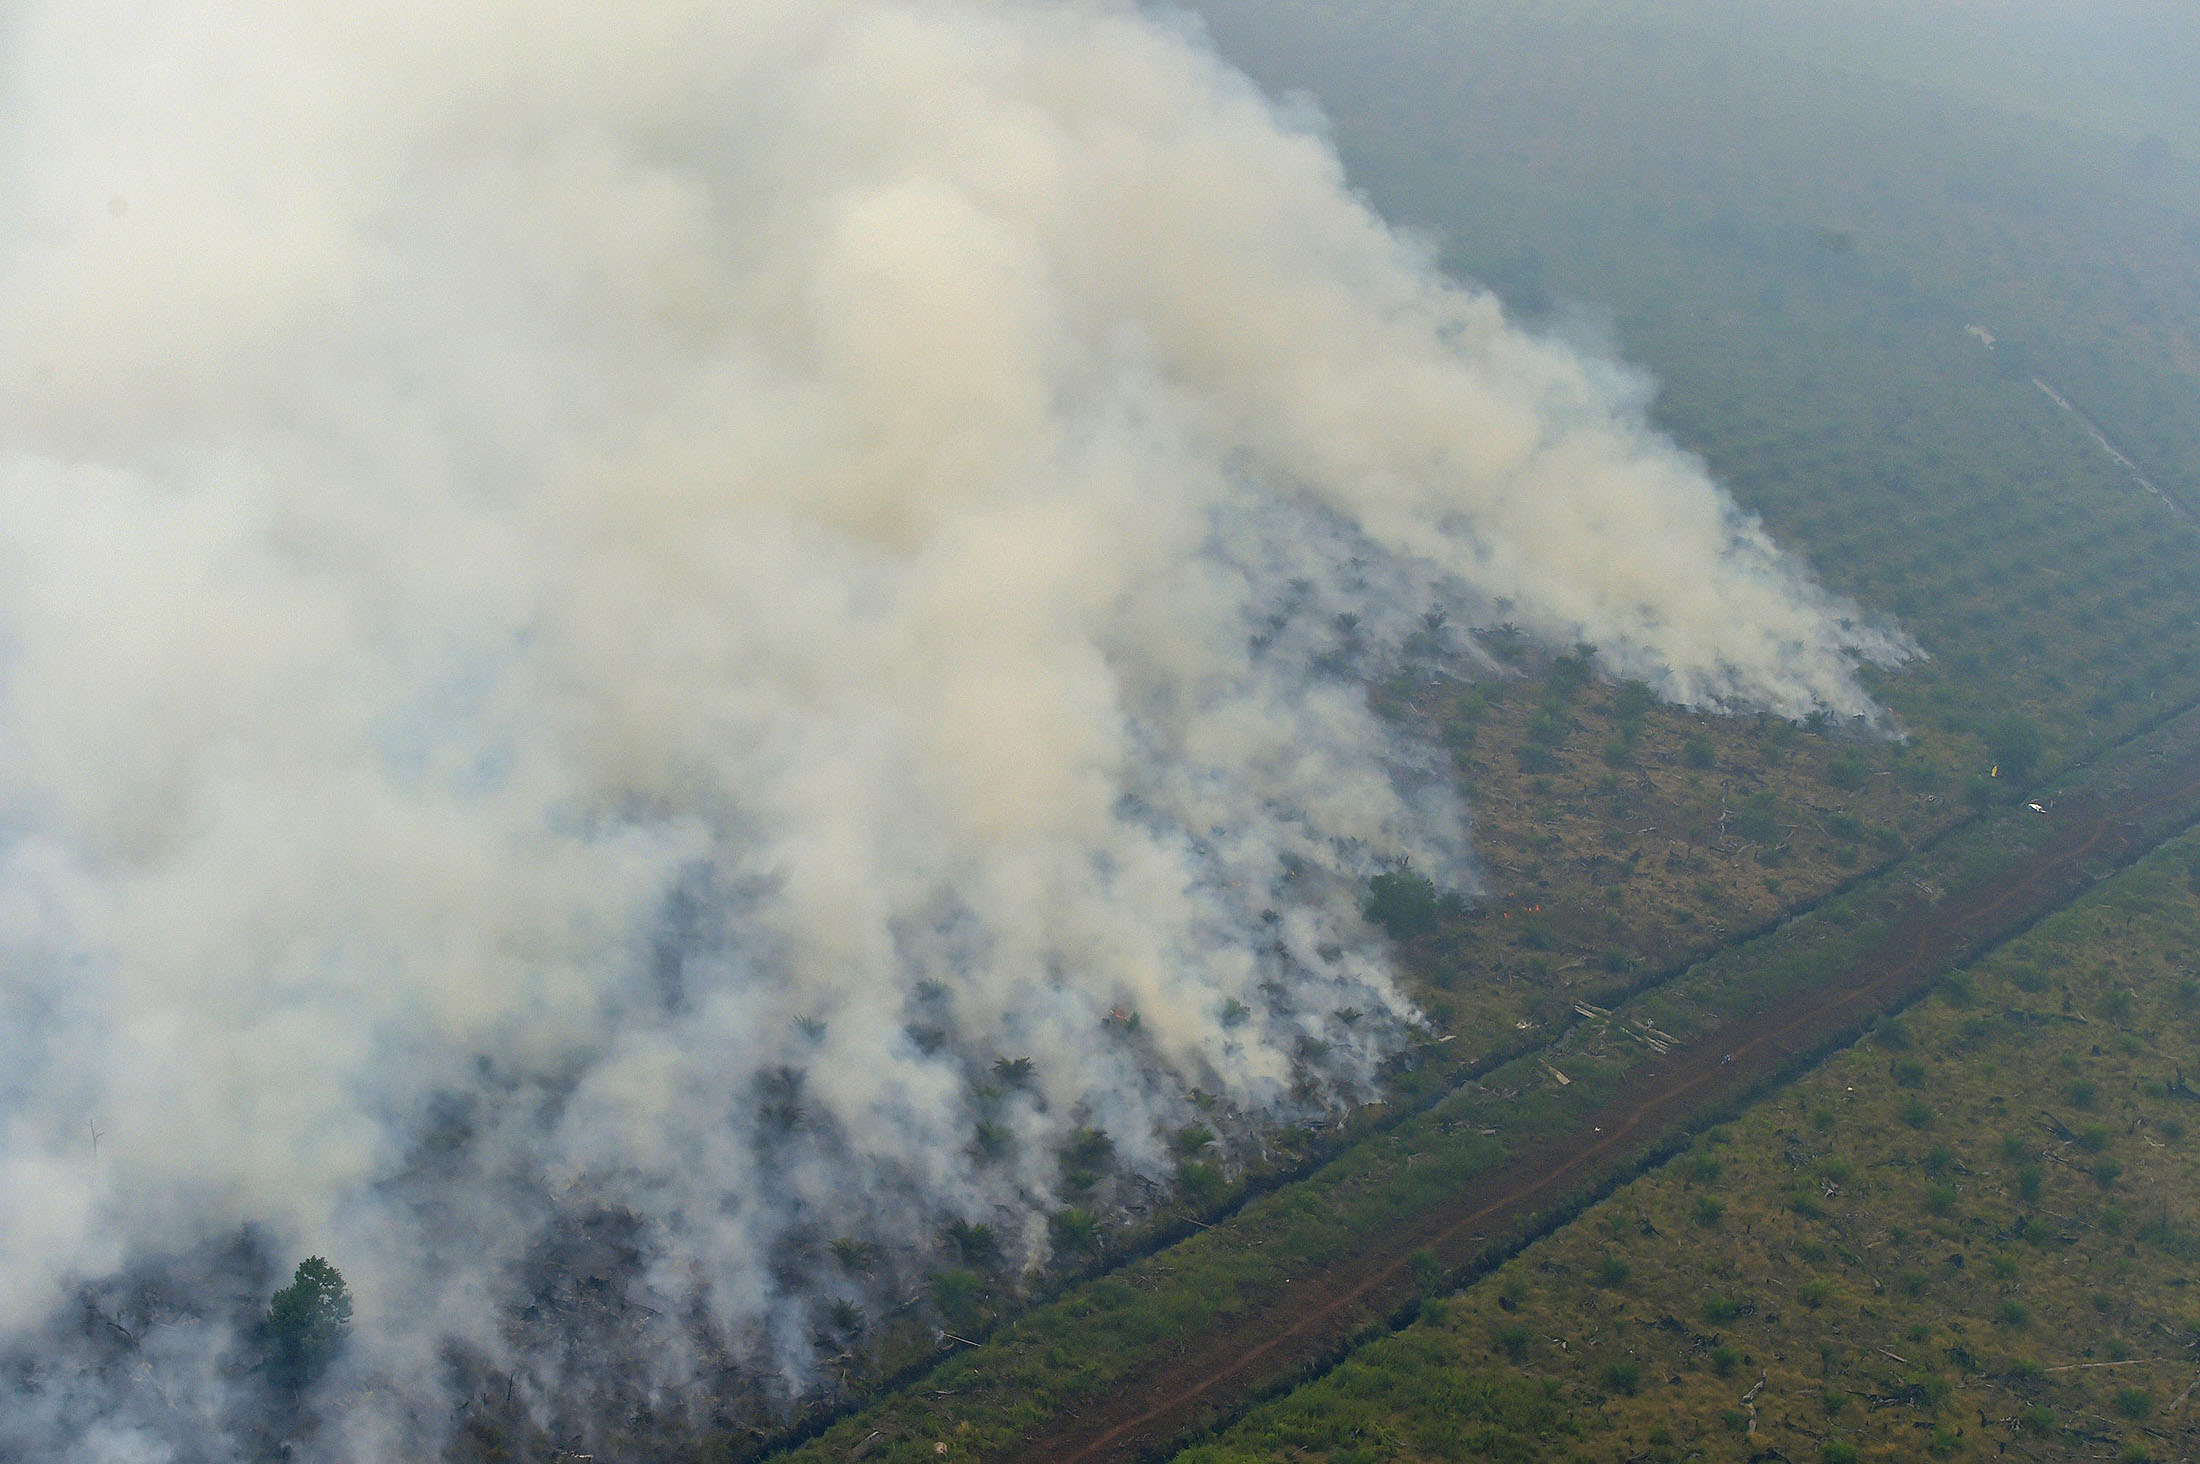 Fires burning at a concession area in Pelalawan, Riau province.
